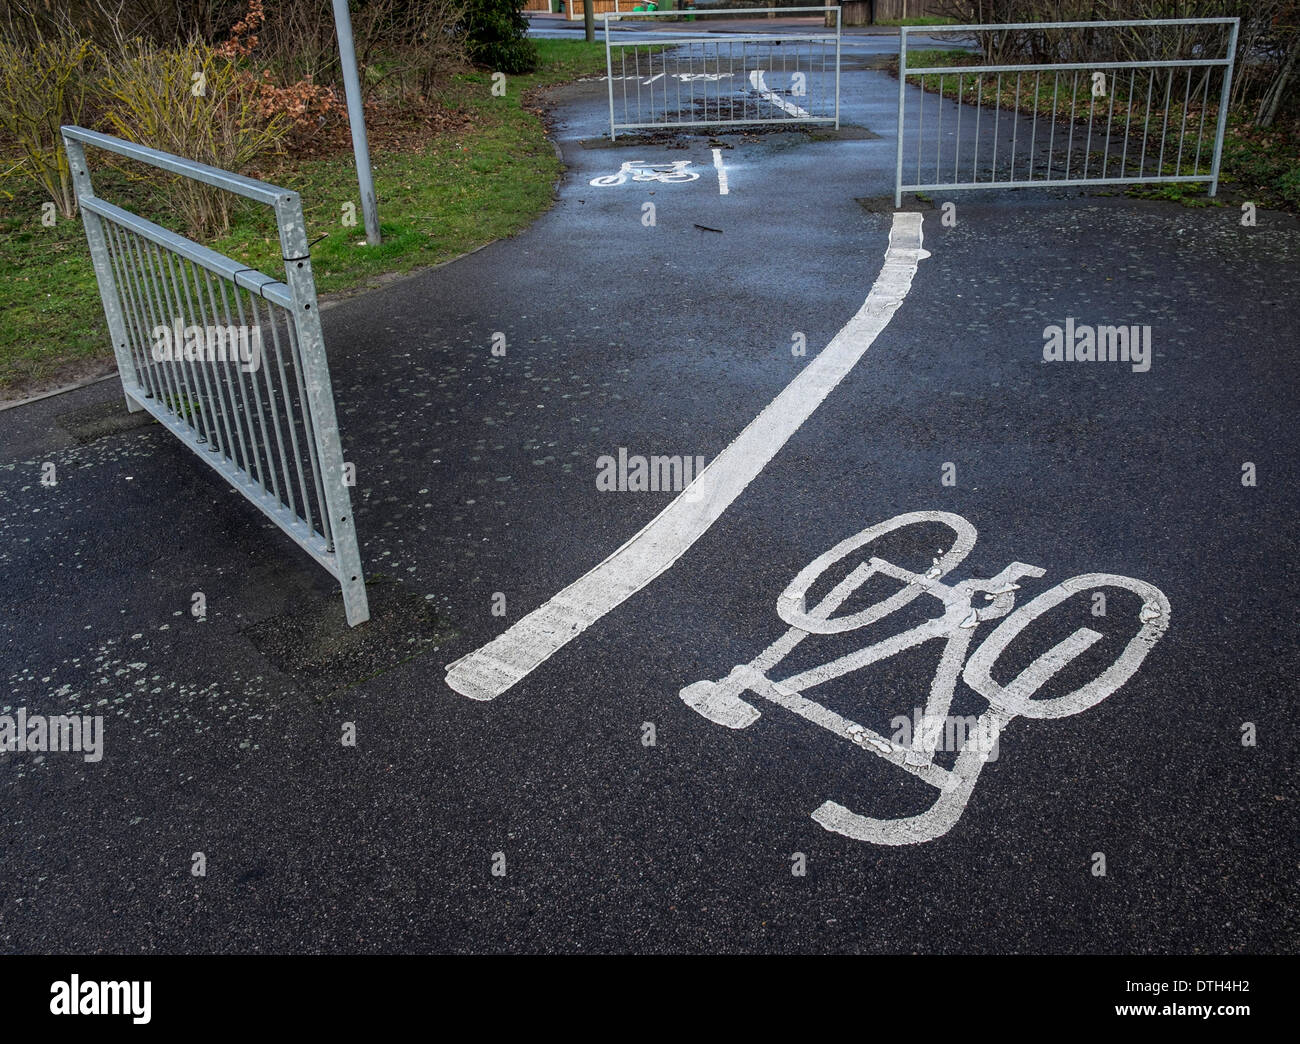 A confusing cycle path junction with metal gates blocking the path and causing a blockage to direction of travel. Stock Photo